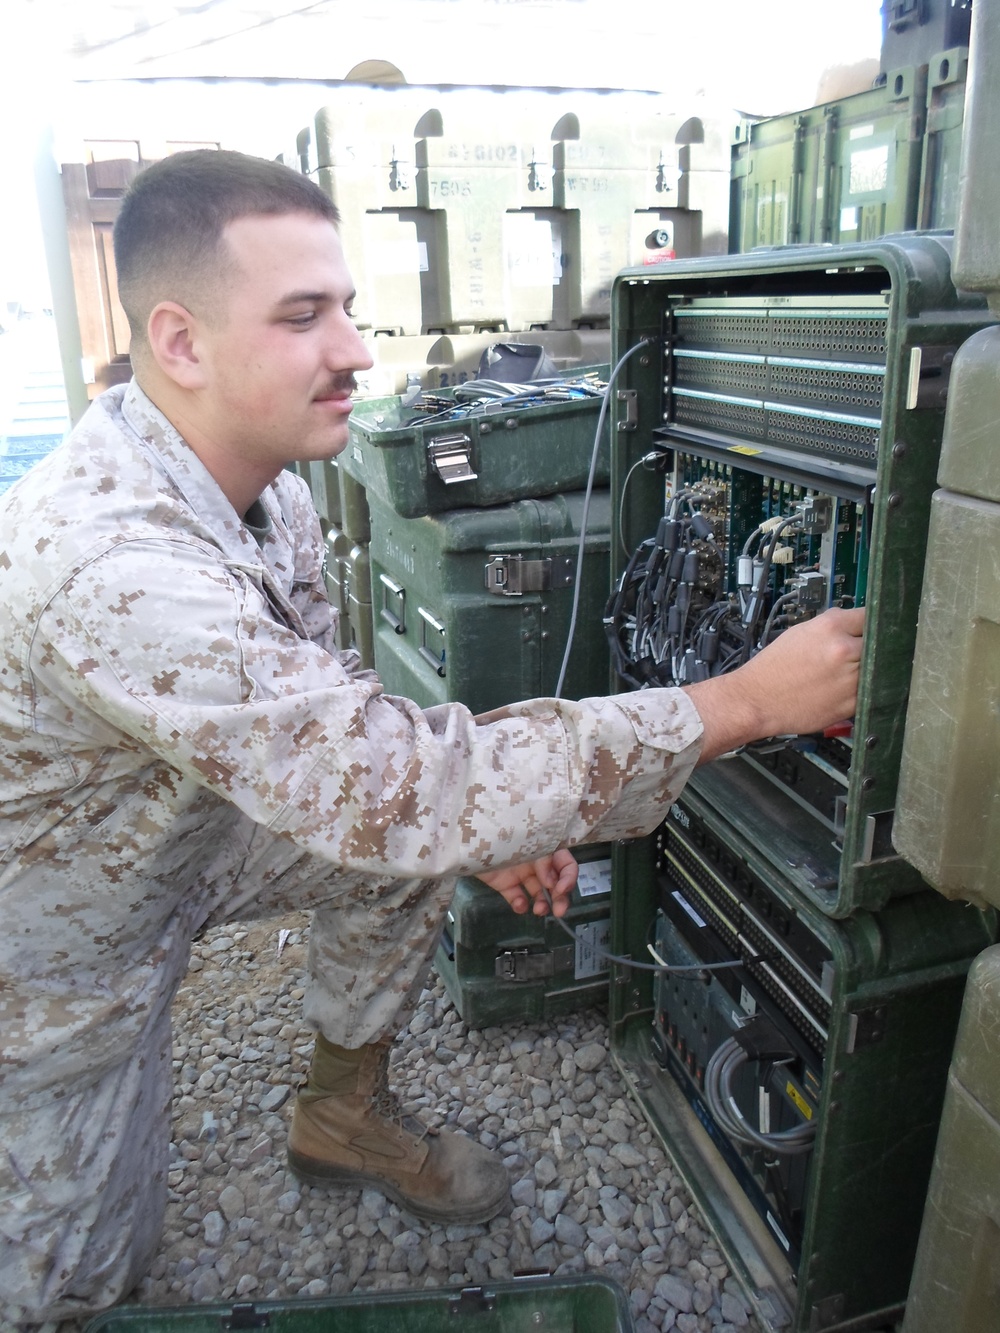 Tactical switchboard operators keep SPMAGTF-CR-CC connected